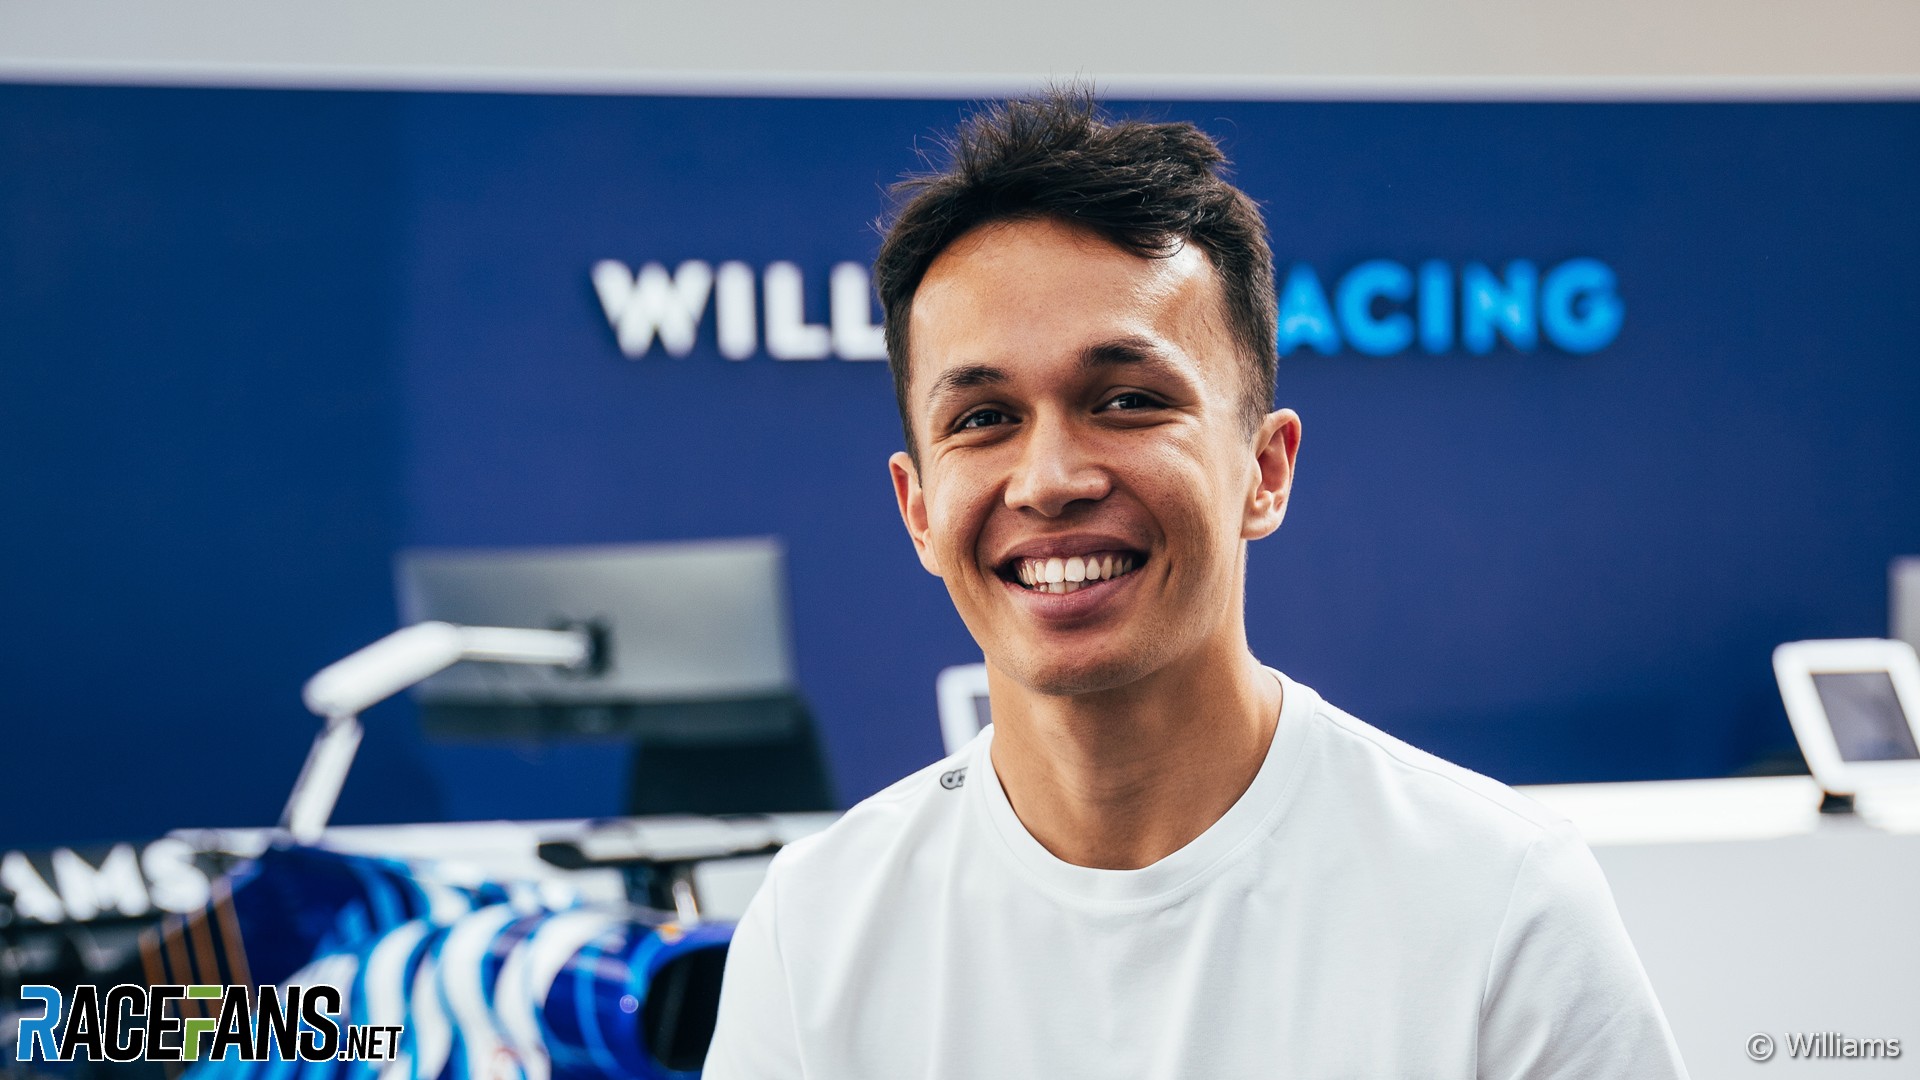 Albon: Williams are as “driven to show what they can do” as I am | 2022 F1 season